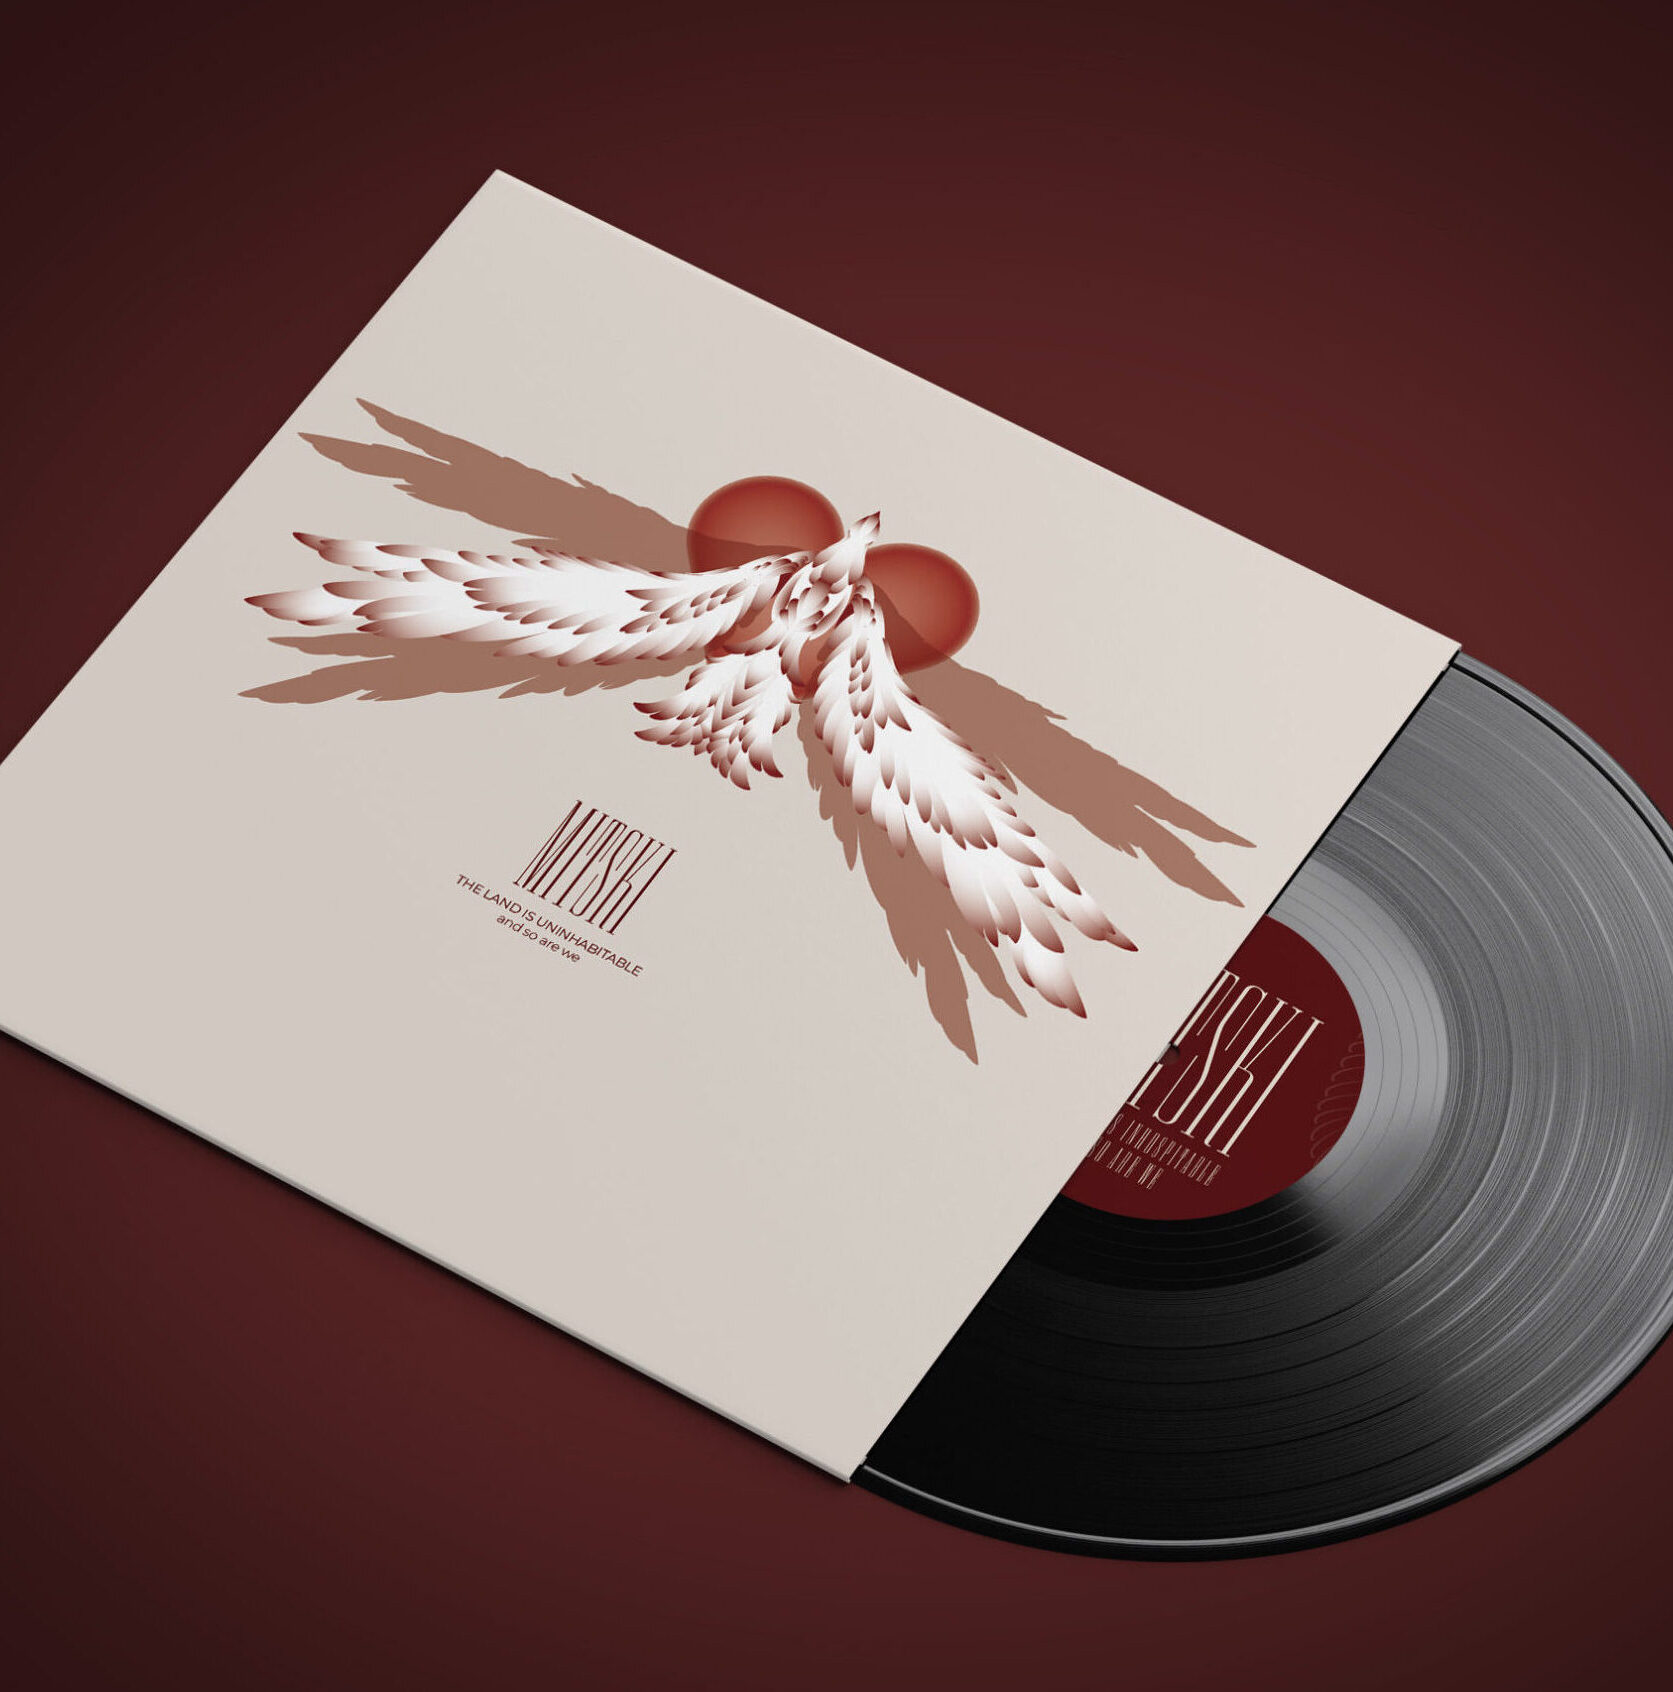 Thumbnail for print portfolio page. It is a fully illustrated vinyl album cover featuring a white bird on a deep red background.